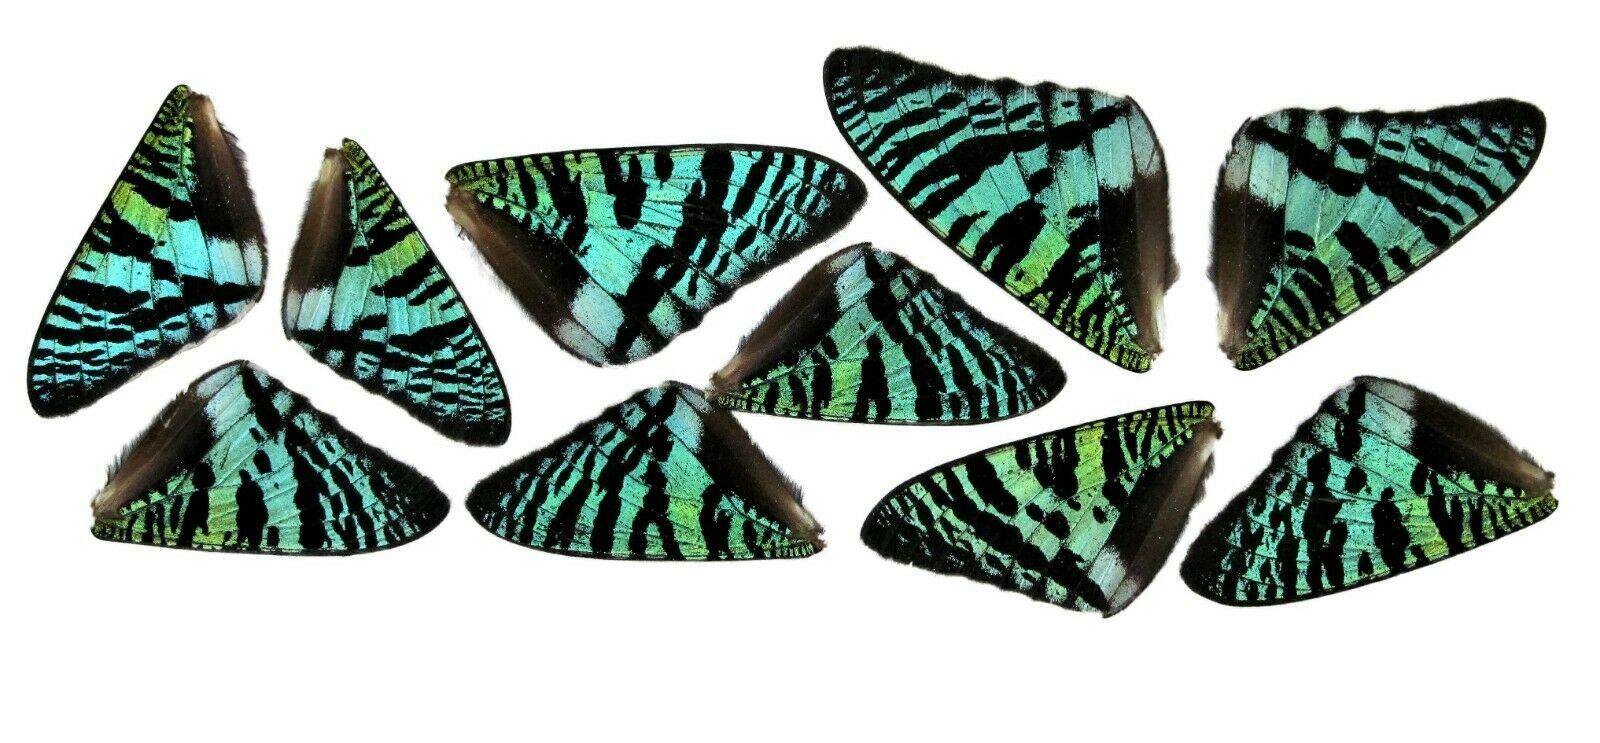 10 Pieces Assorted Green Sunset Moth Urania Butterfly Wings Wholesale Lot Mix